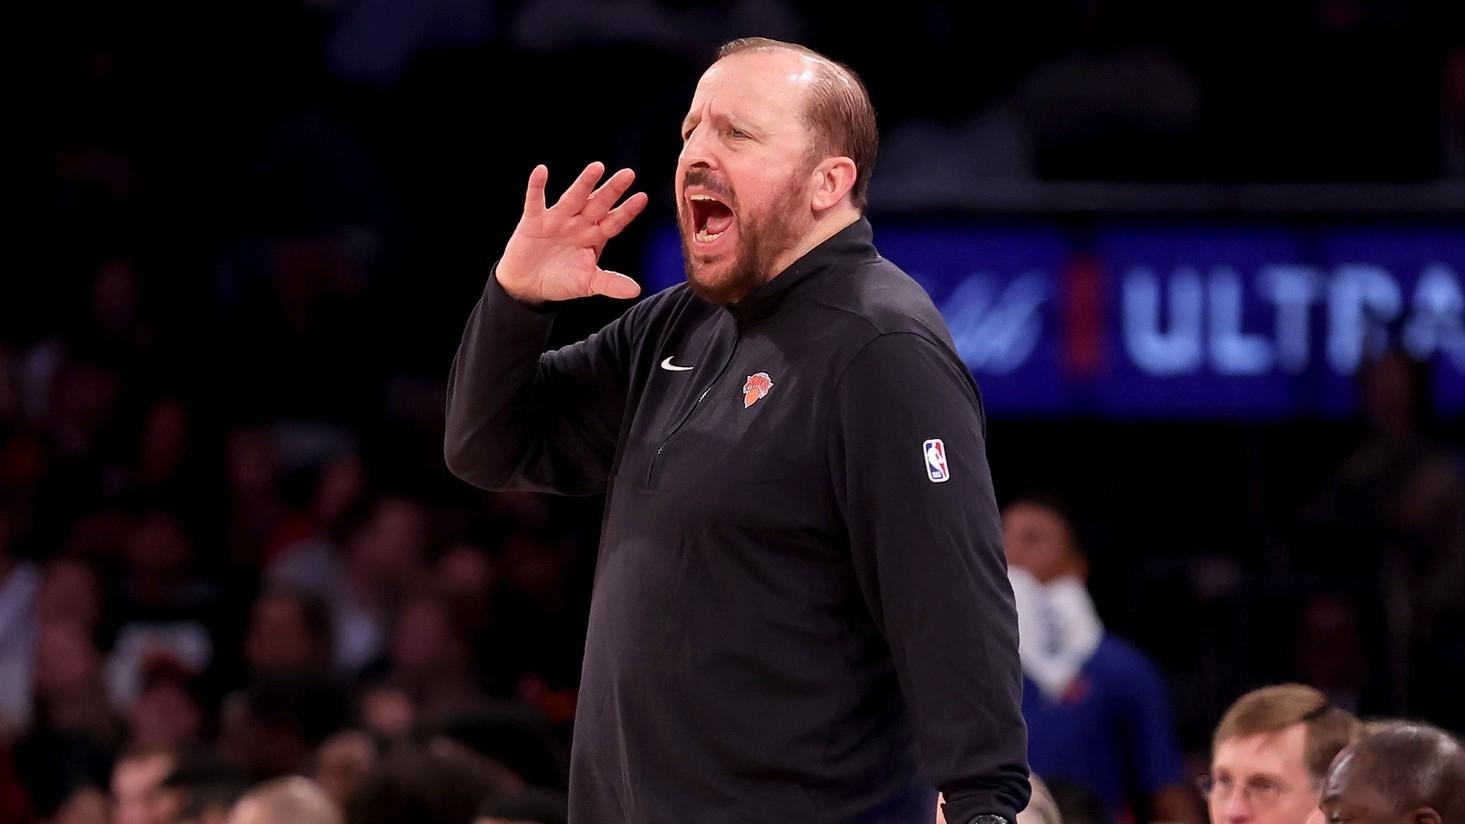 New York Knicks head coach Tom Thibodeau coaches against the Washington Wizards during the fourth quarter at Madison Square Garden. / Brad Penner-USA TODAY Sports